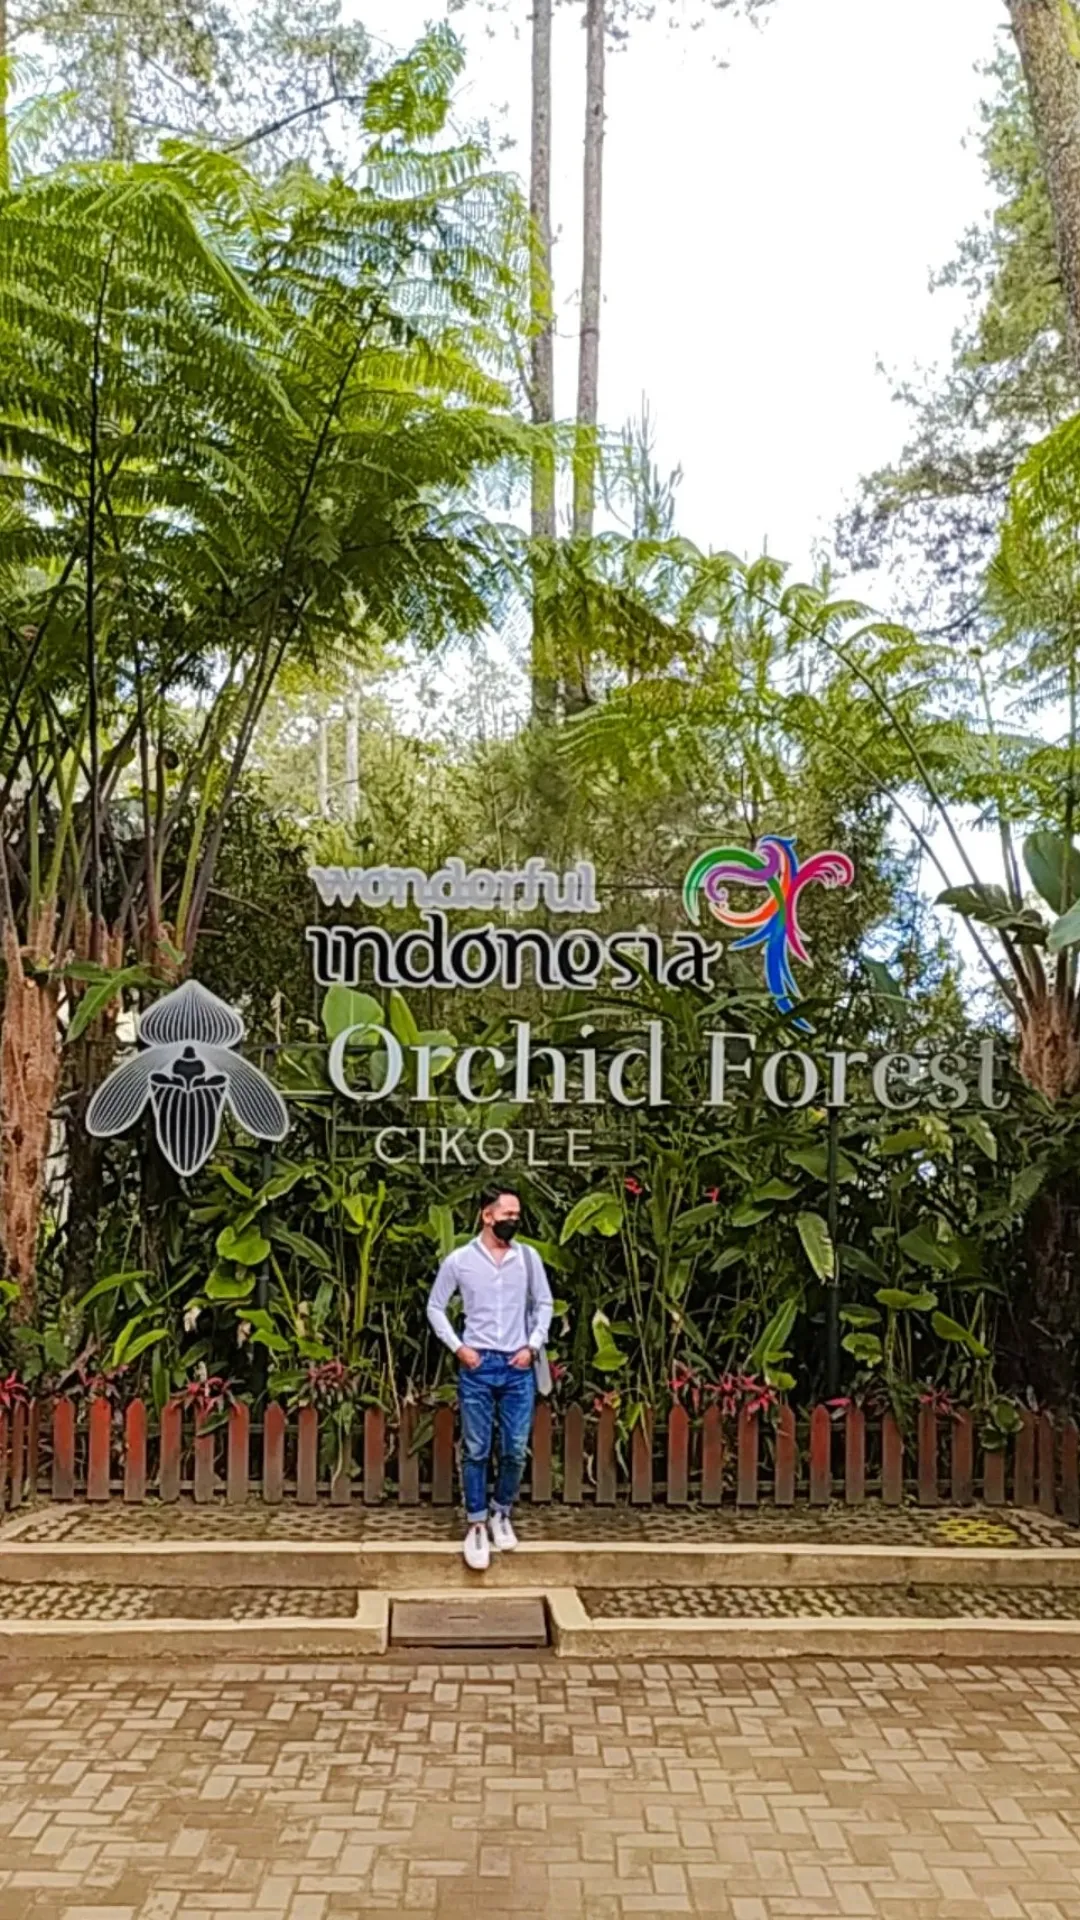 Orchid forest cikole review